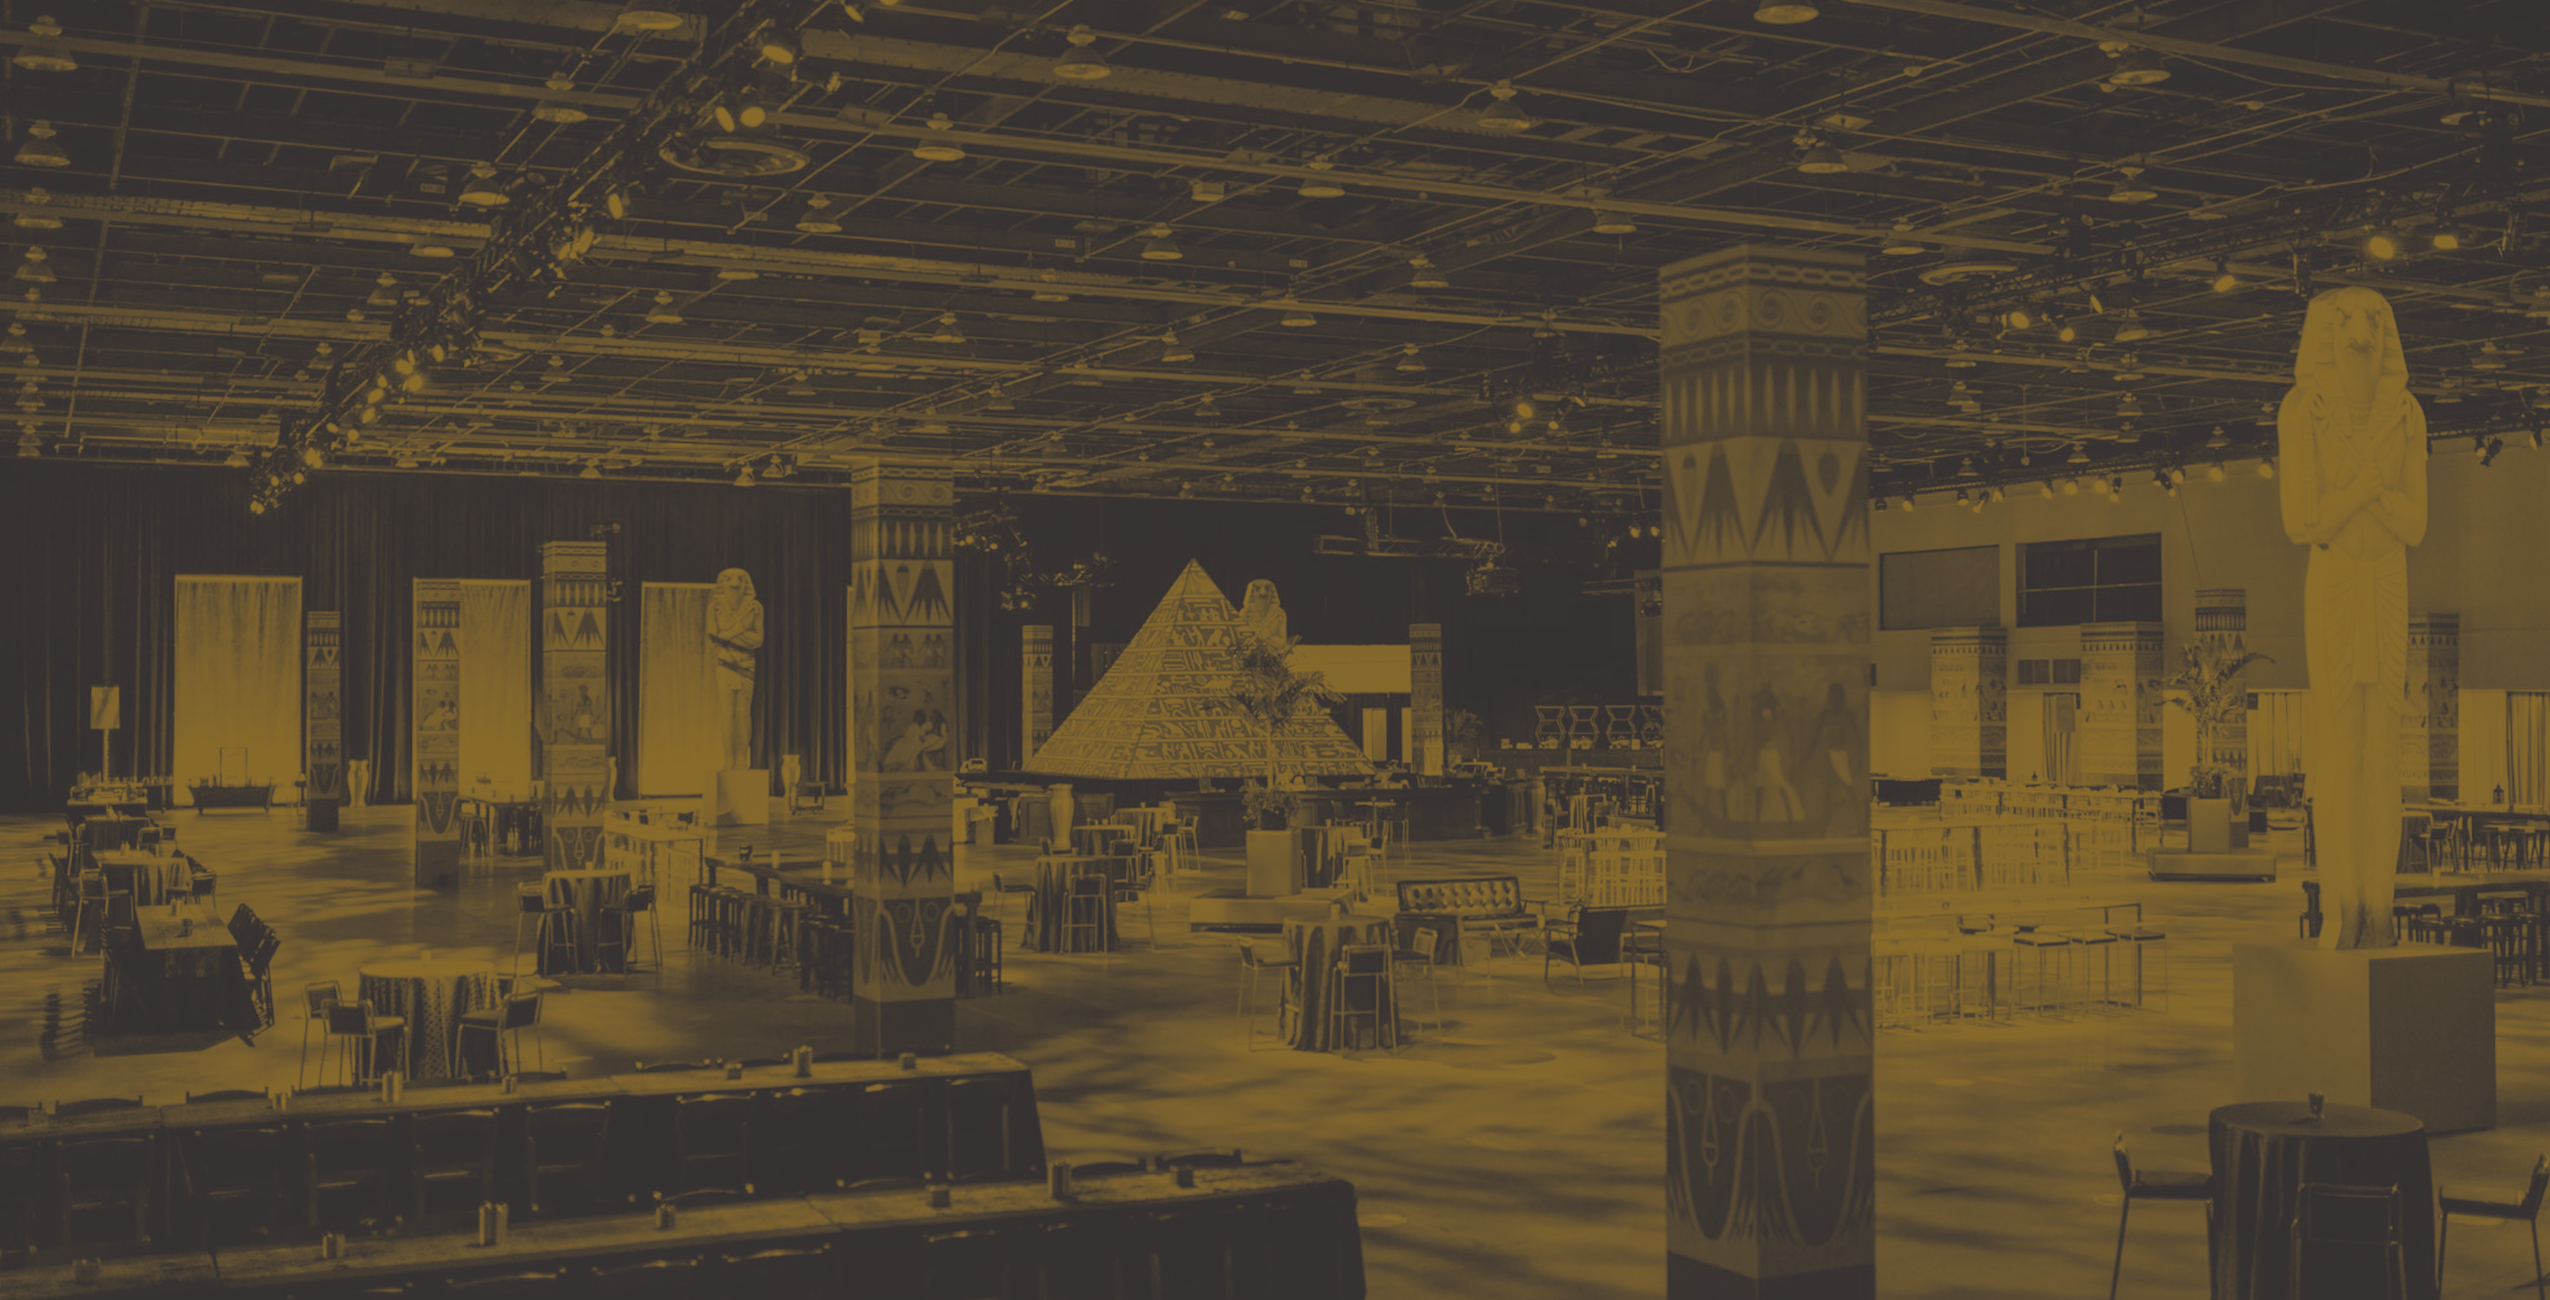 Landscape brand page header image shows a Display Group event with ancient Egypt themed installations behind a duotone brown overlay treatment.